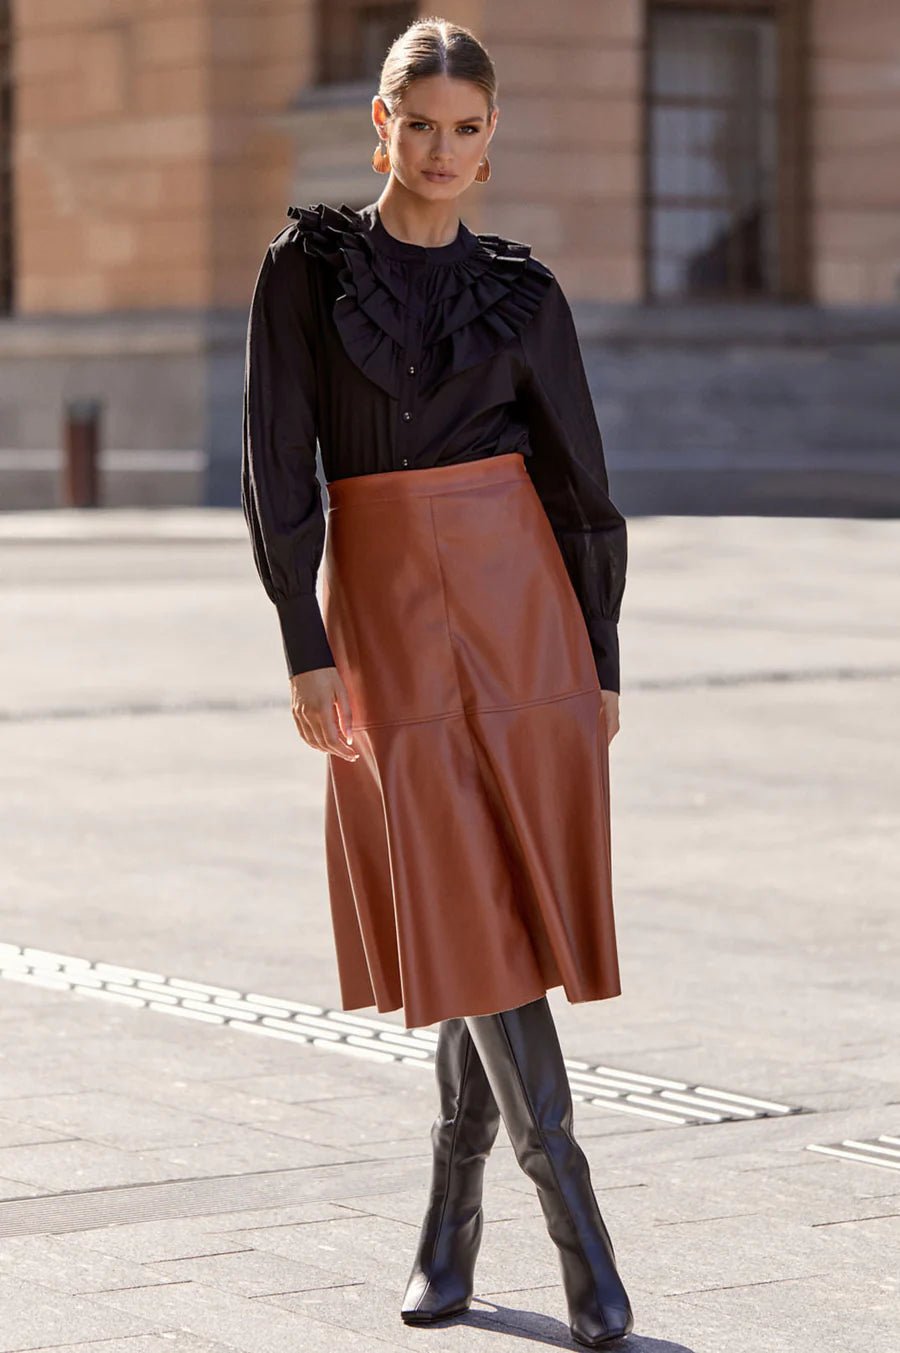 Eloise Faux Leather Skirt (Tan) - Something For Me​​